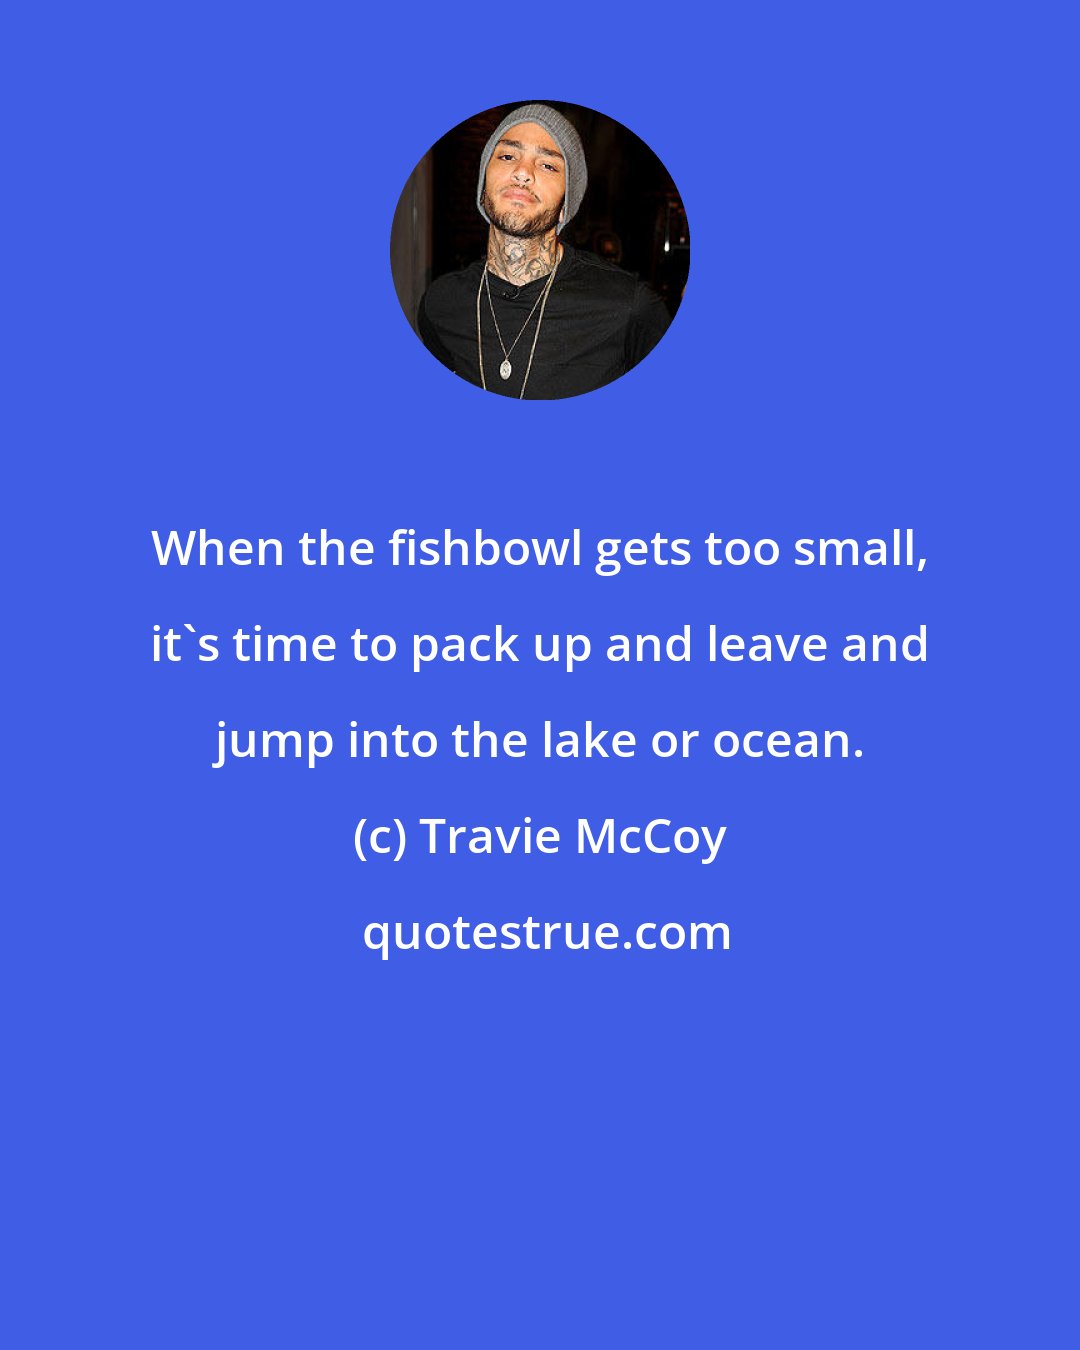 Travie McCoy: When the fishbowl gets too small, it's time to pack up and leave and jump into the lake or ocean.